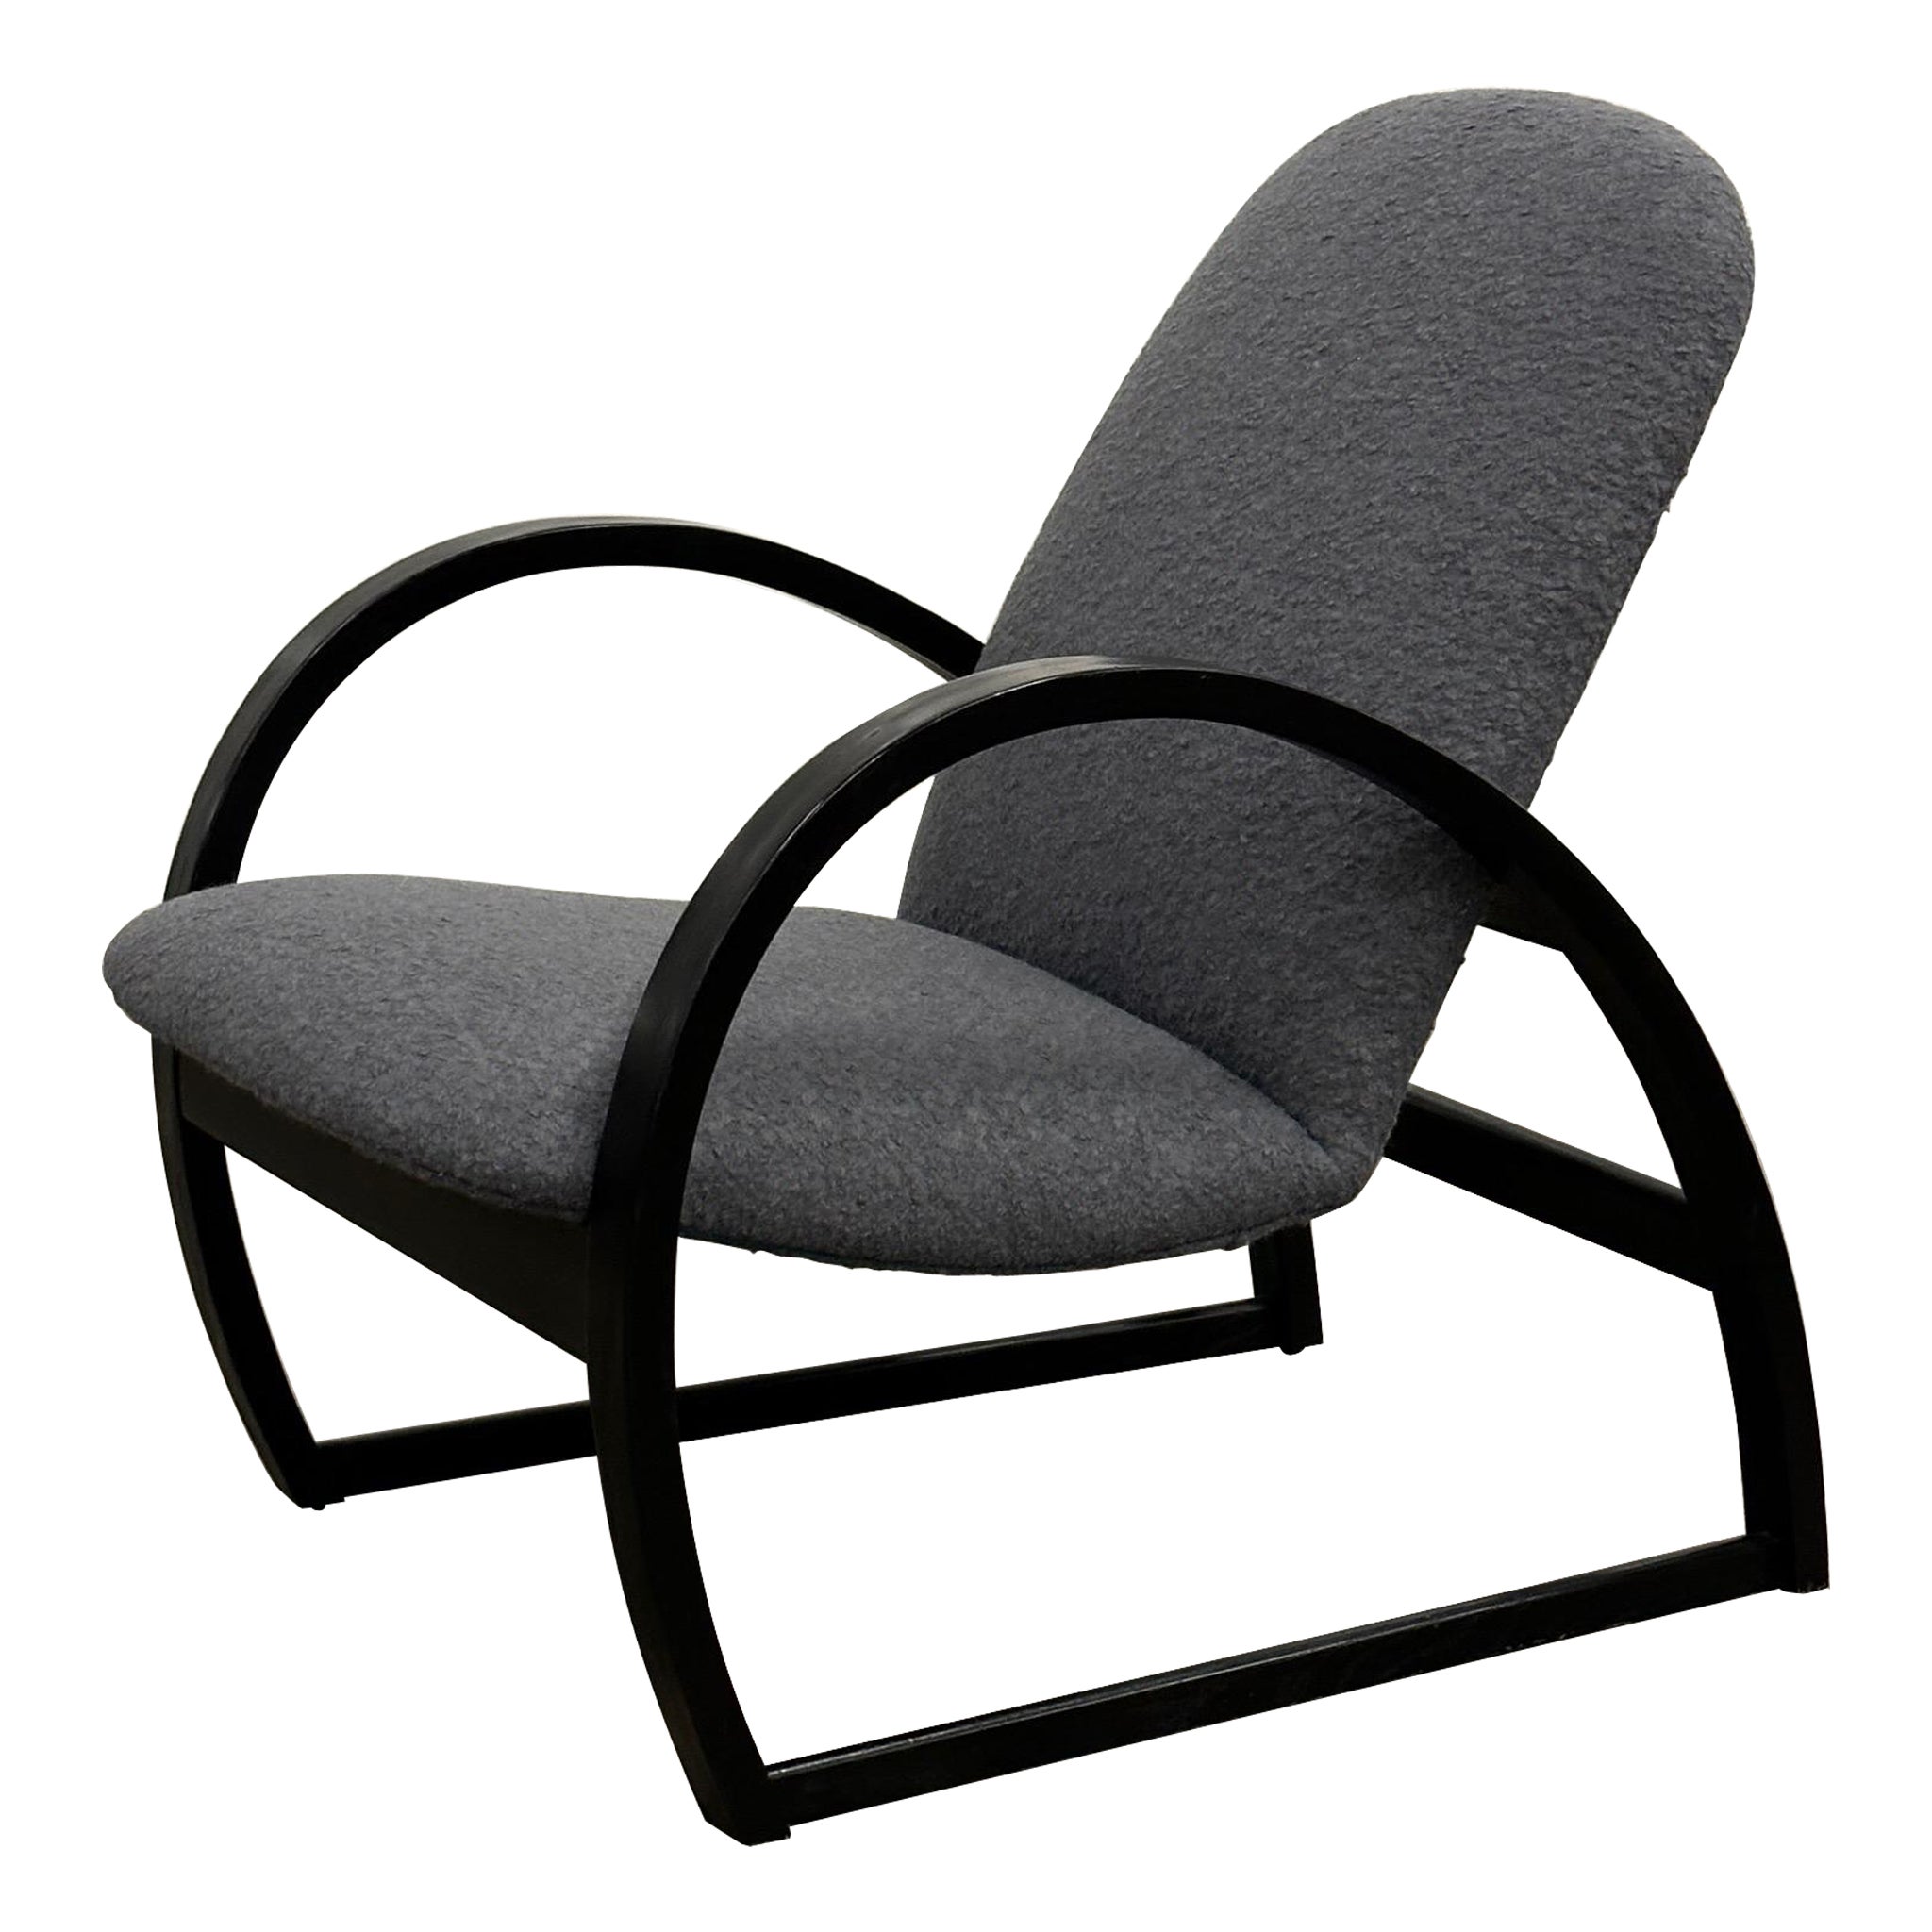 Lazy Spiral Chair by Peter Danko For Sale